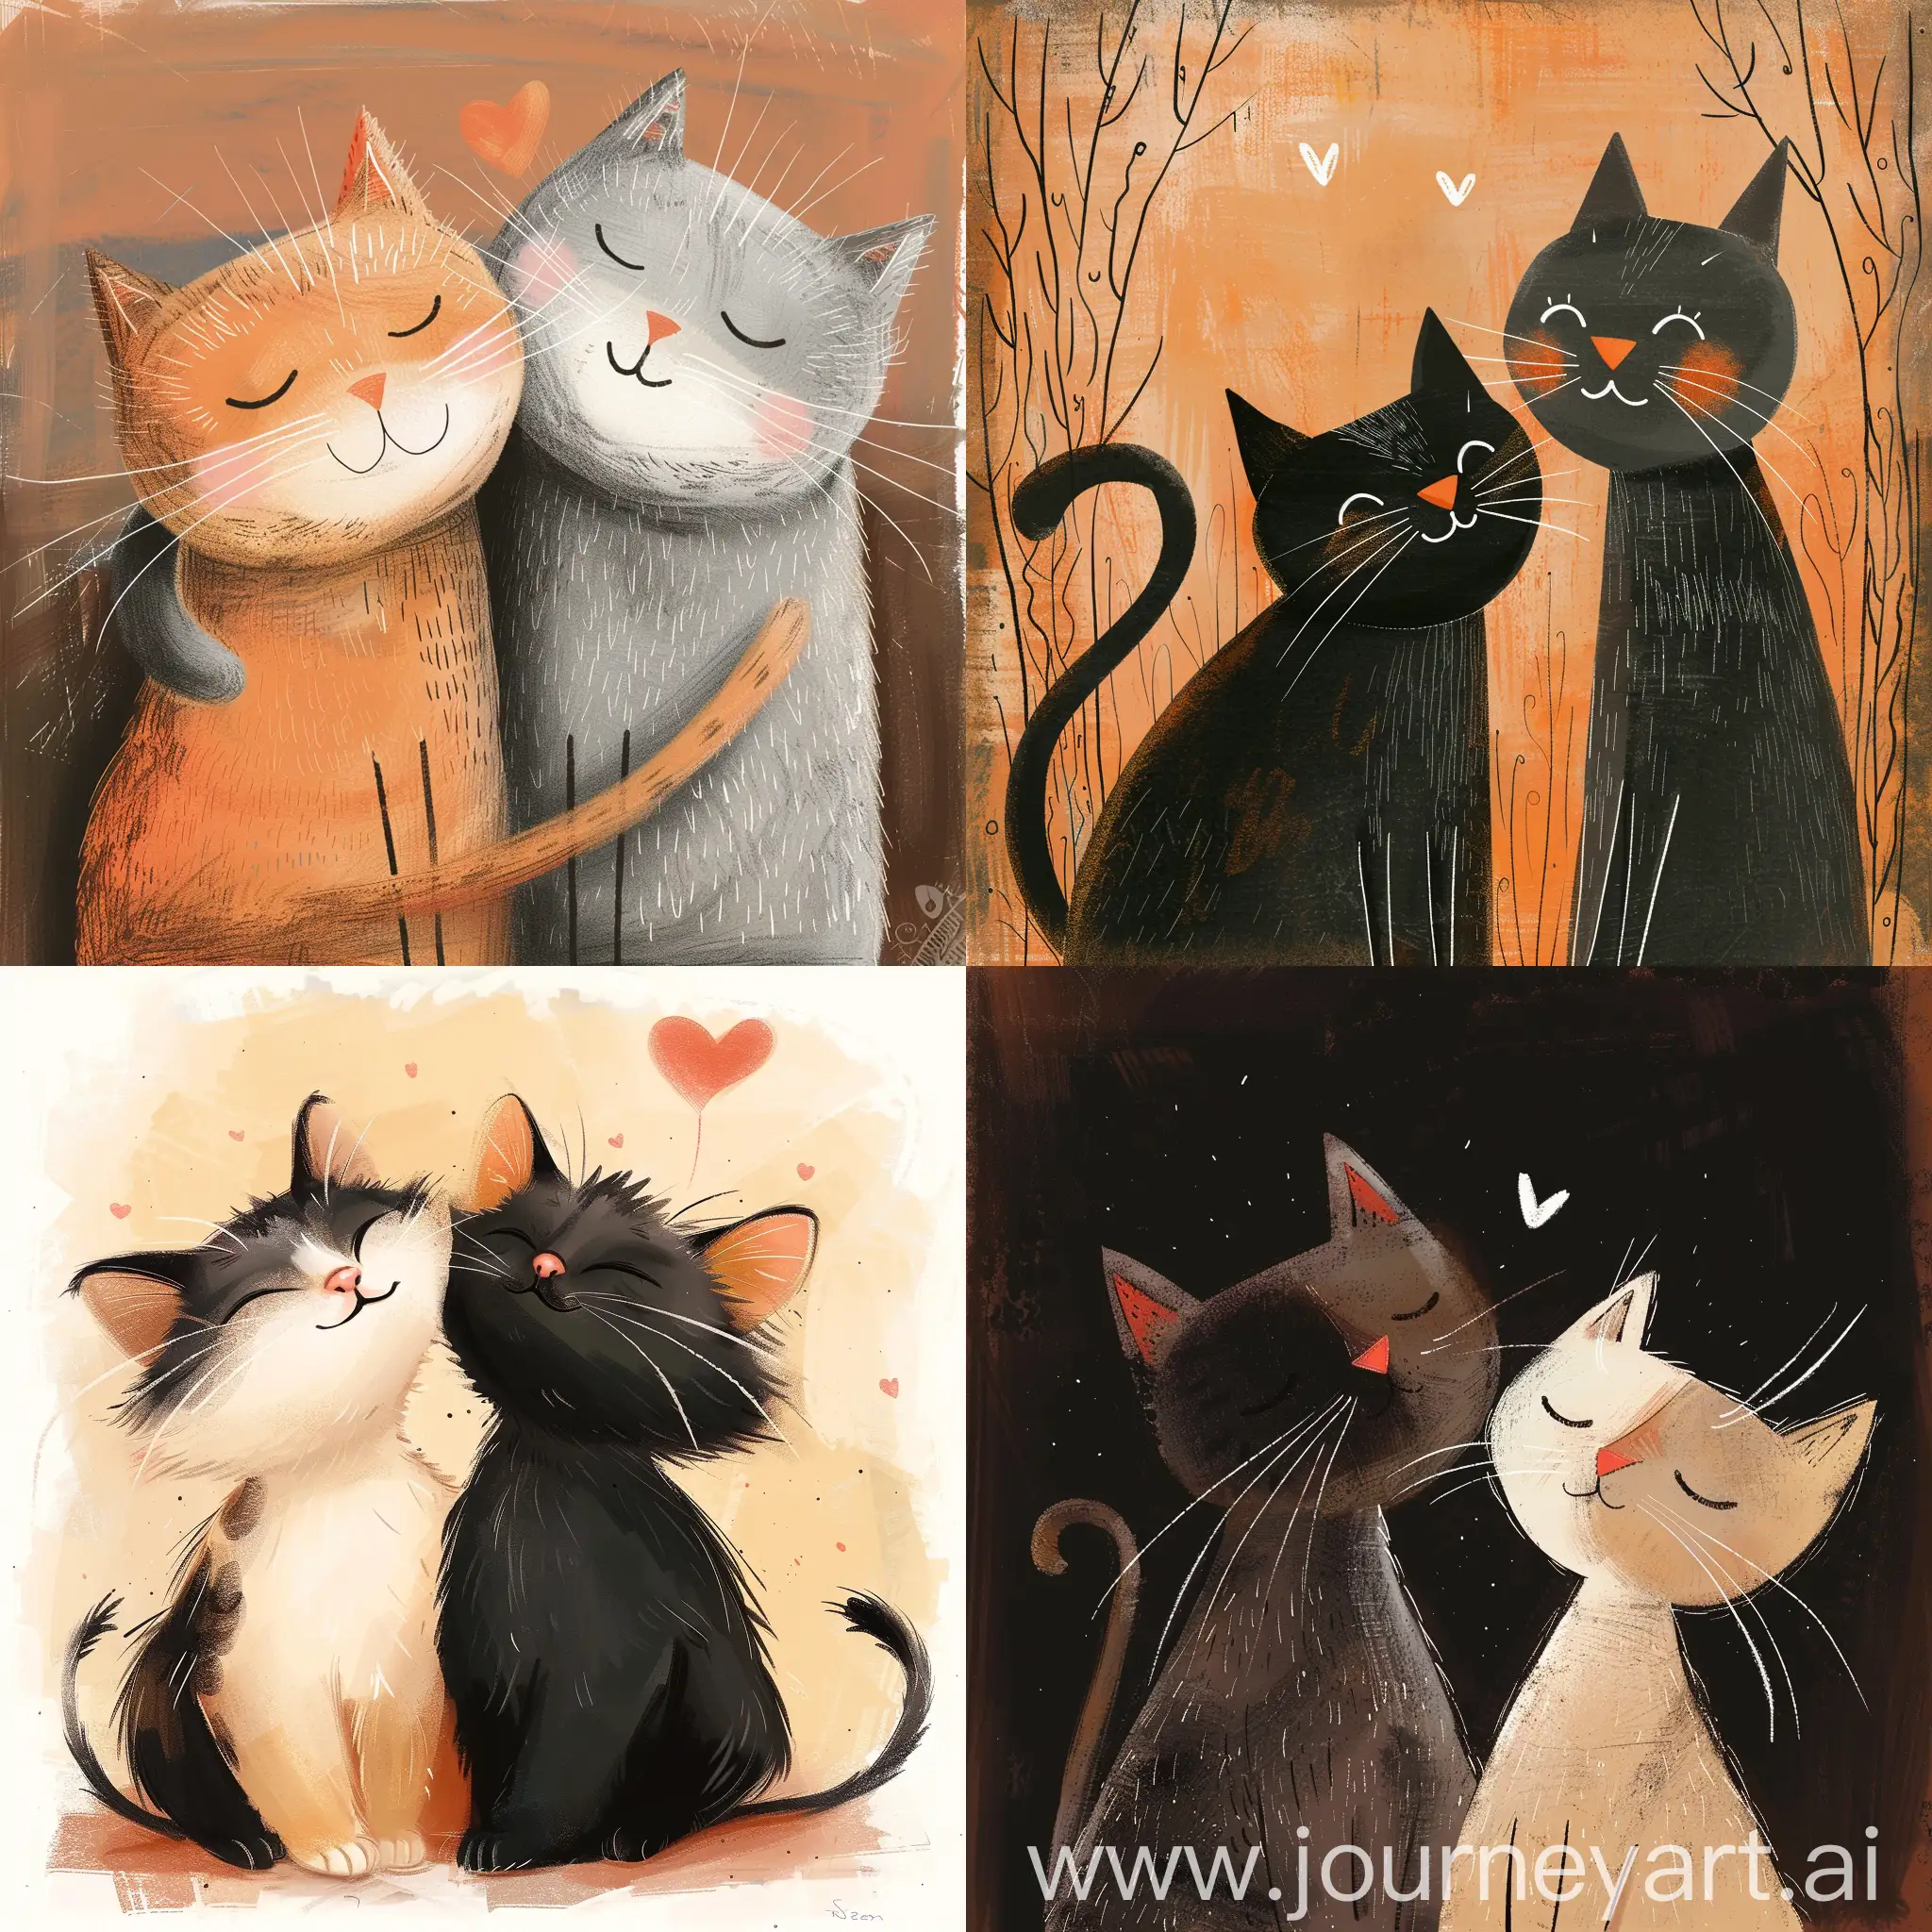 Two-Cats-Sharing-a-Romantic-Date-Night-Heartwarming-Illustration-of-Love-and-Care